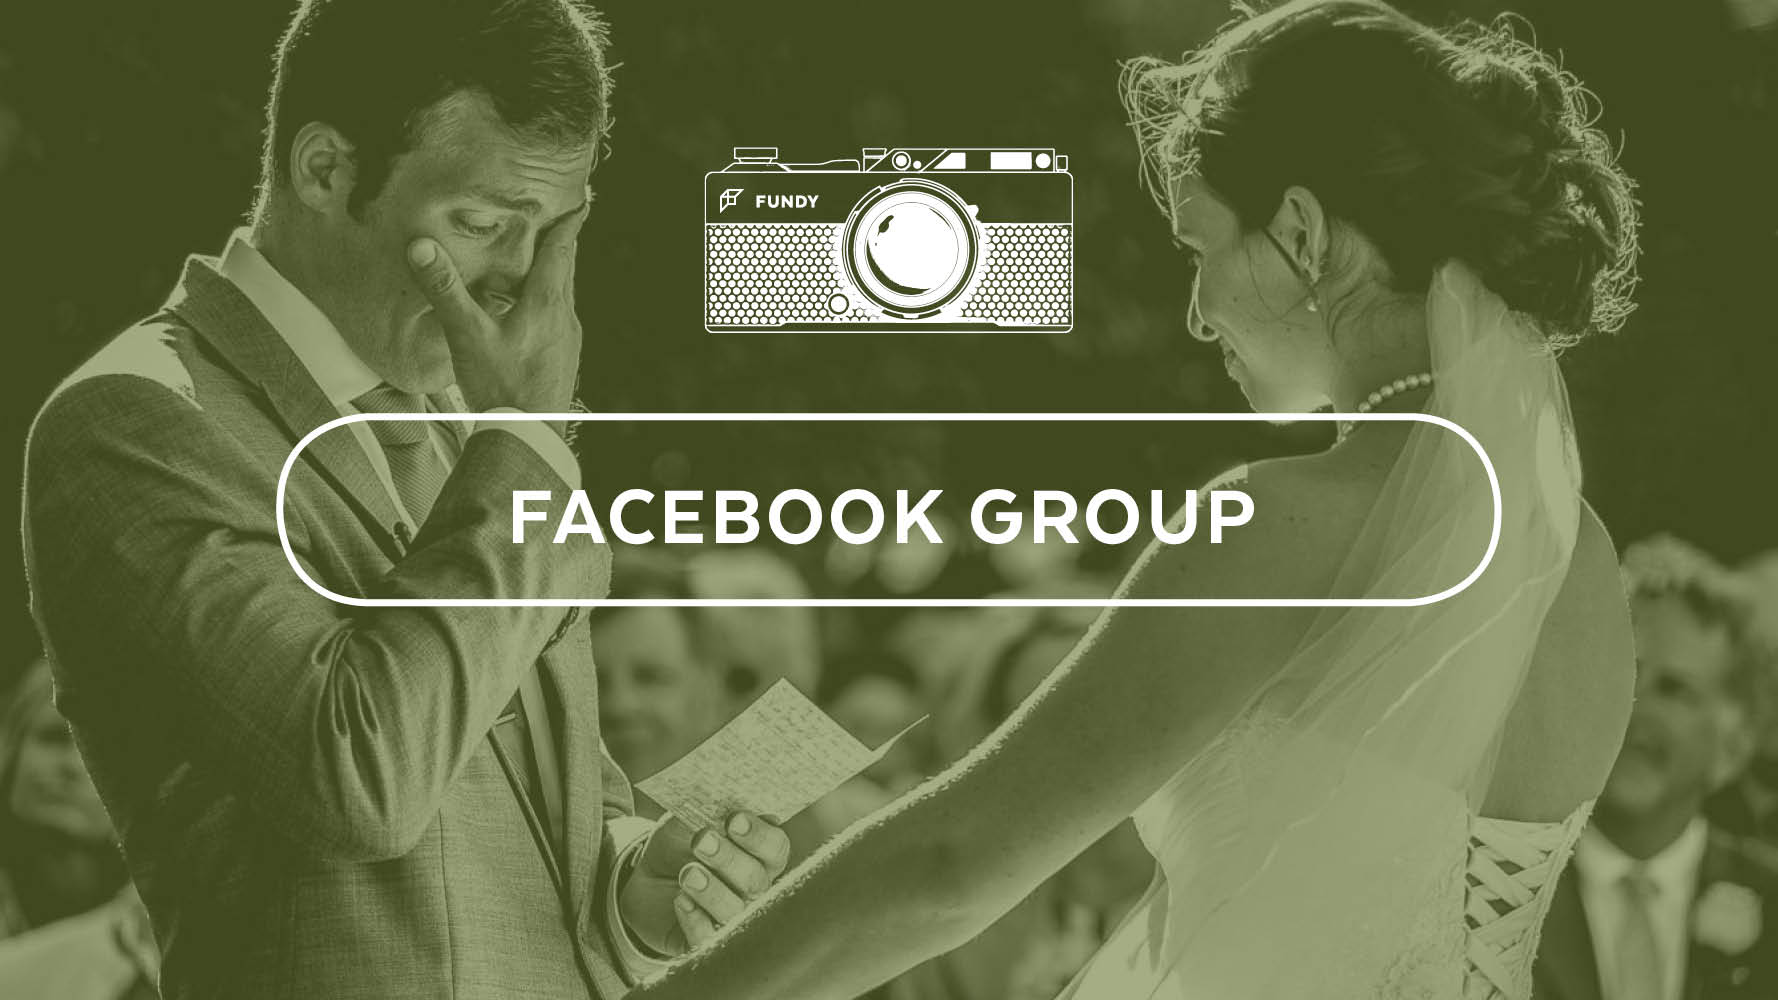 Facebook Group Feature Image V